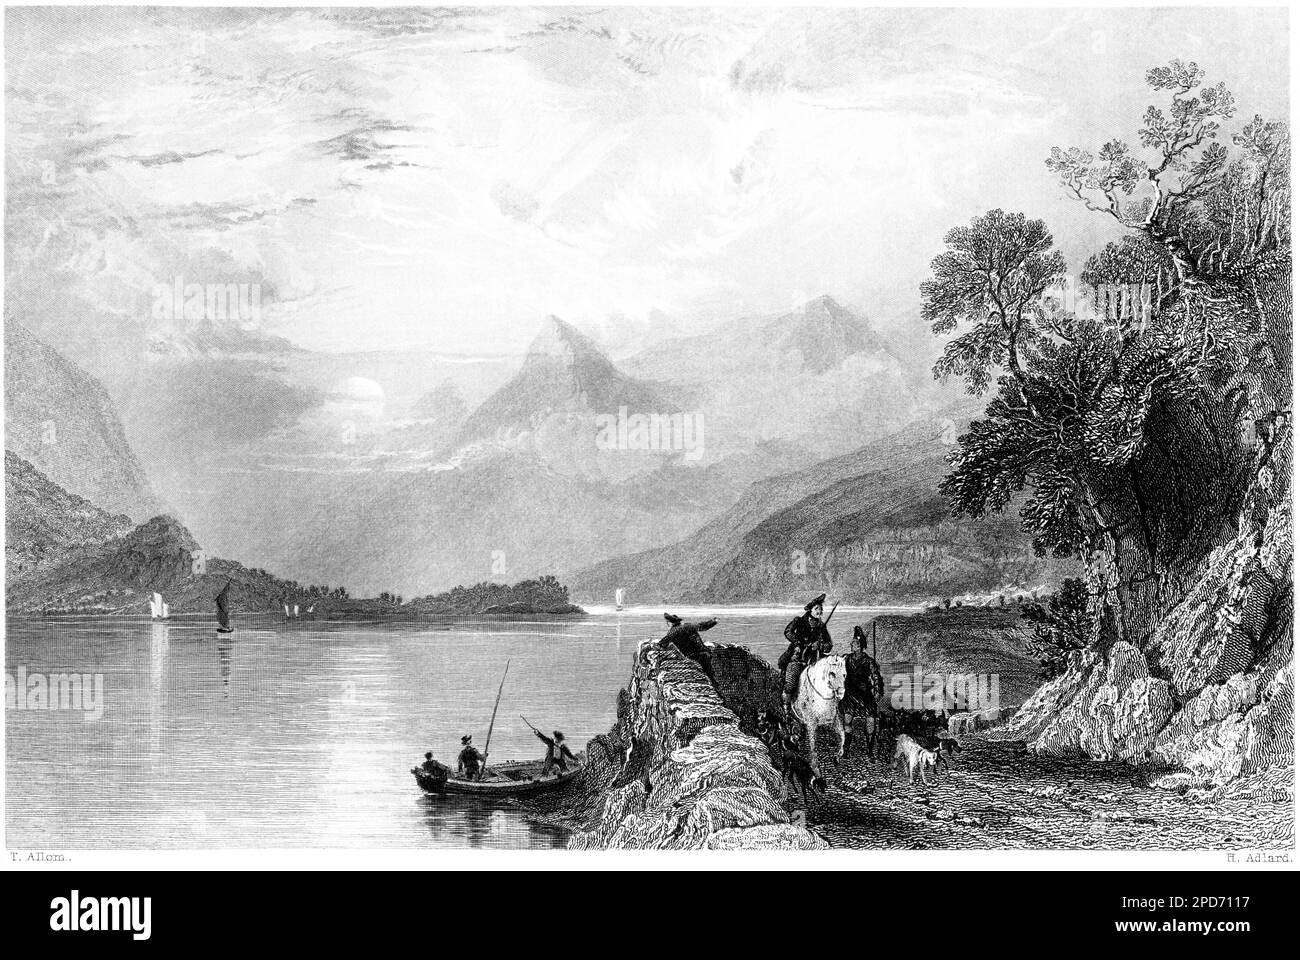 An engraving of Loch Leven from Ballahuish (Ballachulish) Ferry, Argyllshire, Scotland UK scanned at high resolution from a book printed in 1840. Stock Photo